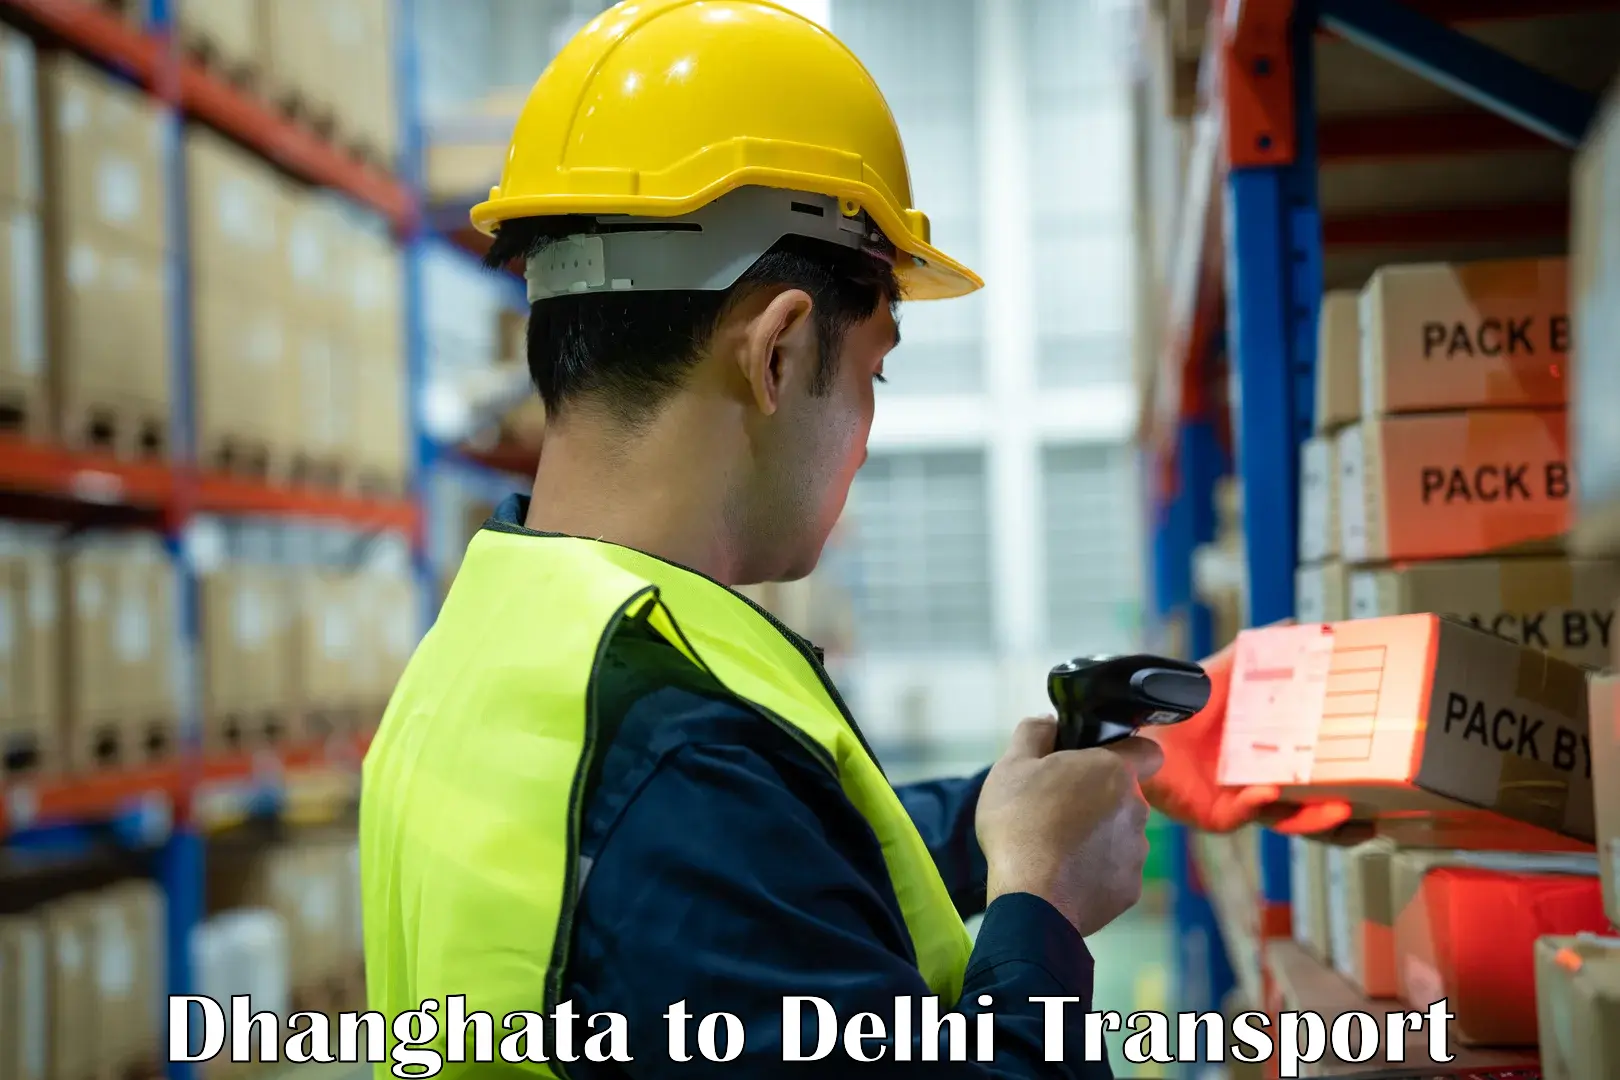 Commercial transport service Dhanghata to NCR